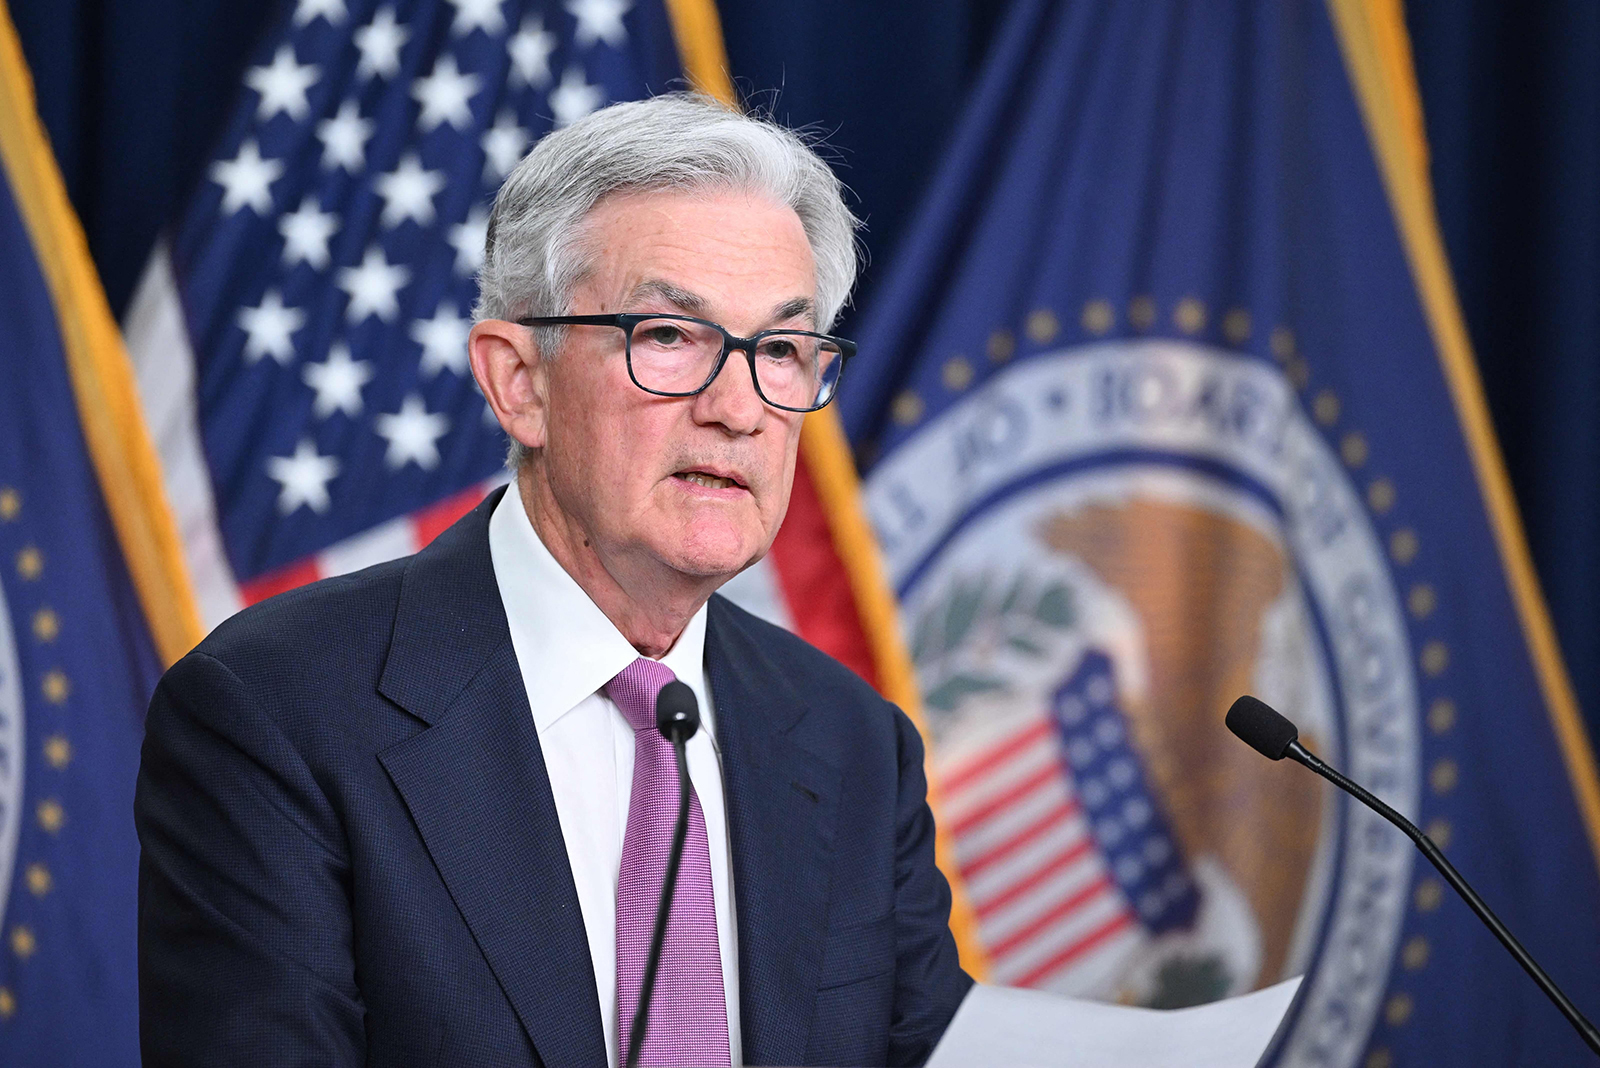 Federal Reserve Board Chairman Jerome Powell speaks during a news conference following the Federal Open Market Committee meeting, at the Federal Reserve in Washington, DC, on June 14.